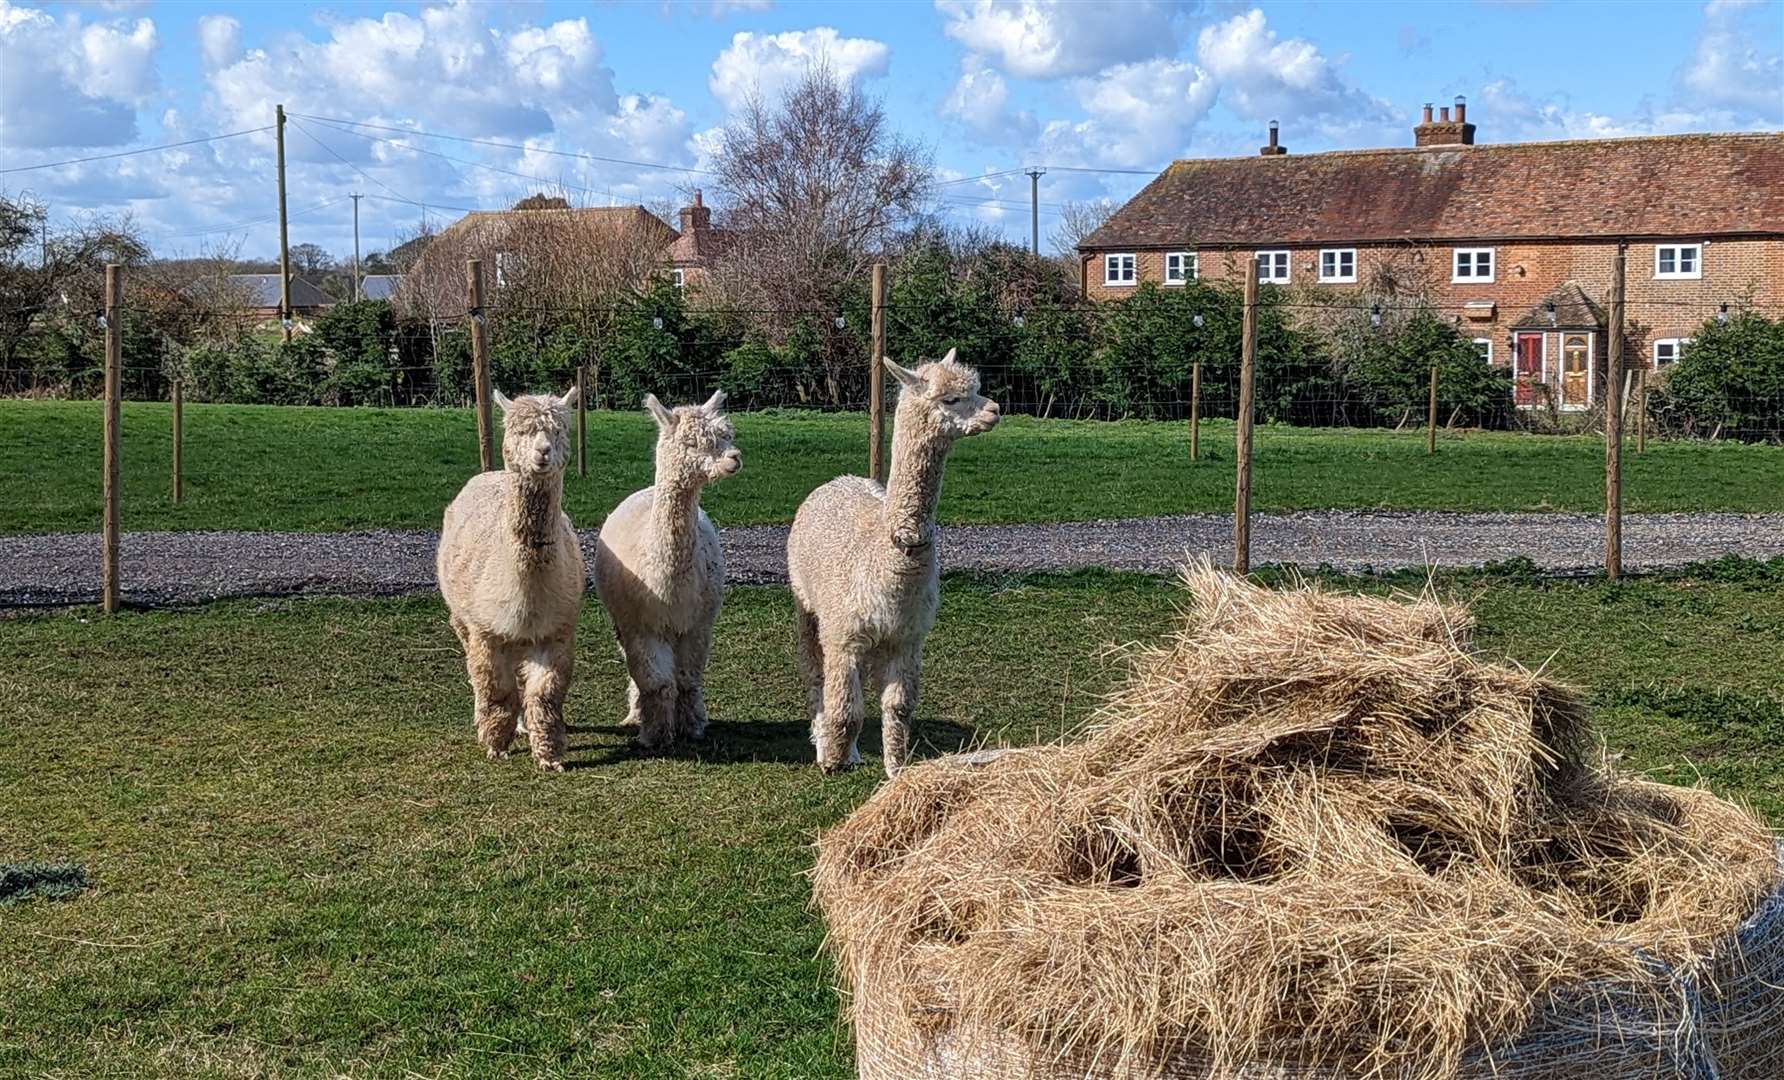 The Bonds have a number of animals on the site - including three alpacas